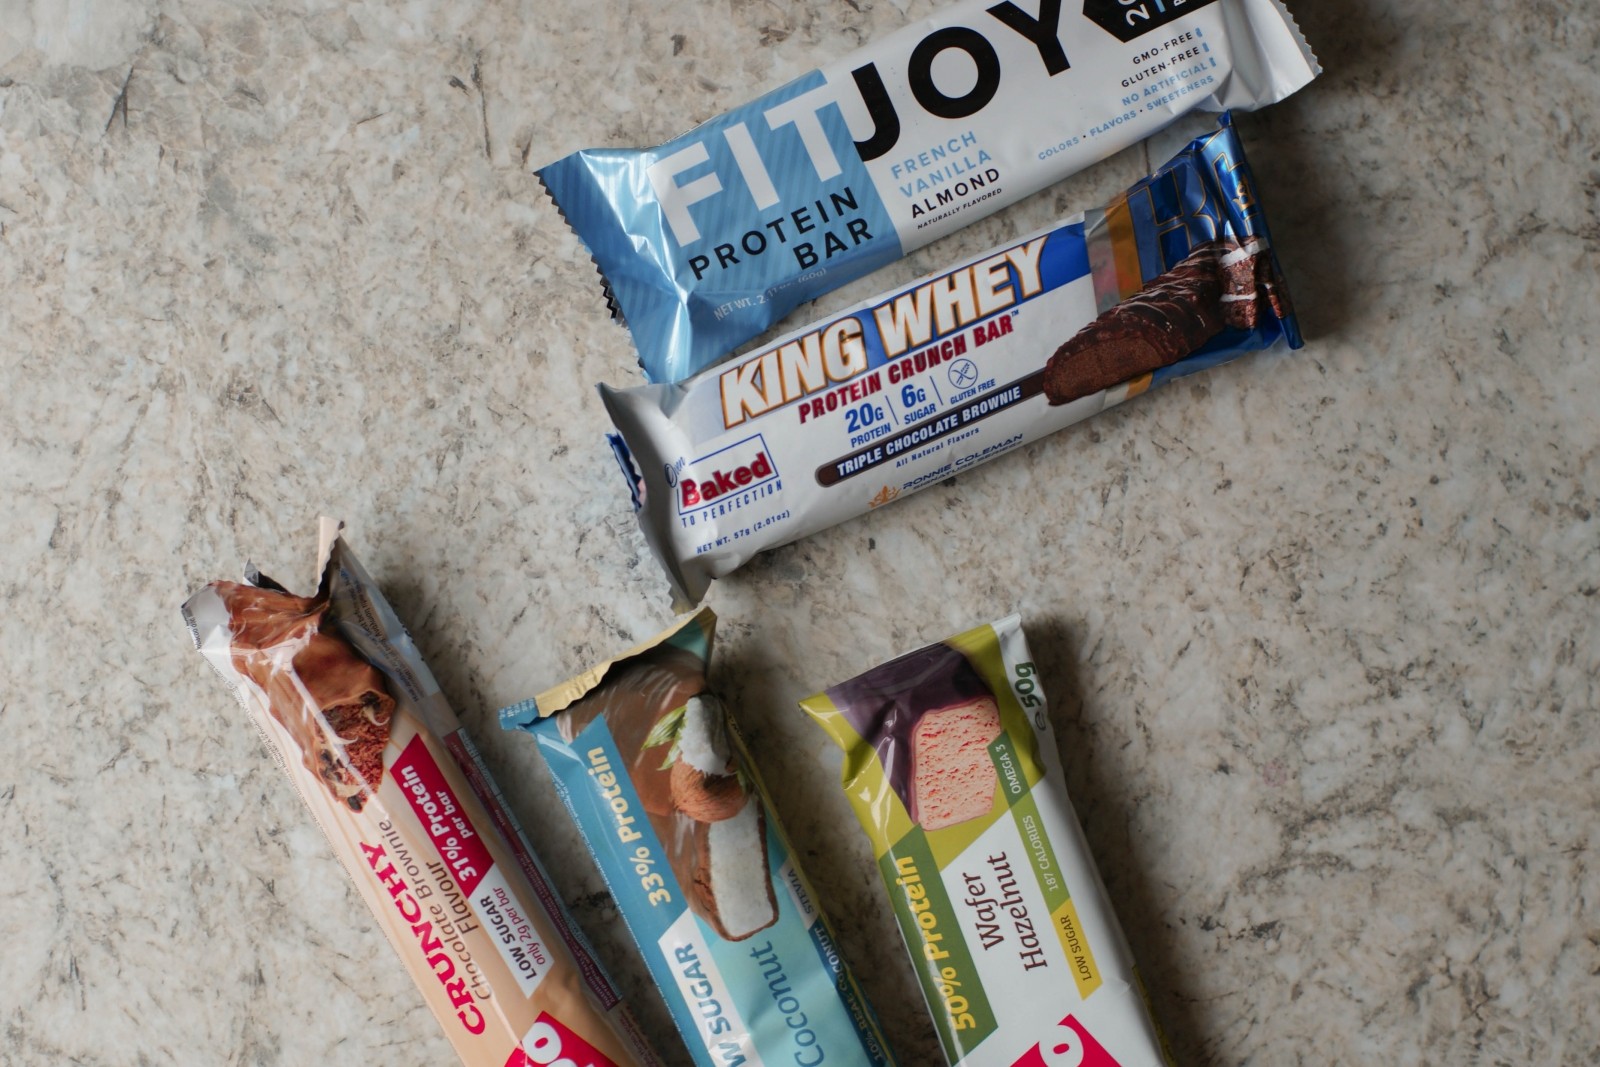 King Whey Protein Bars Review